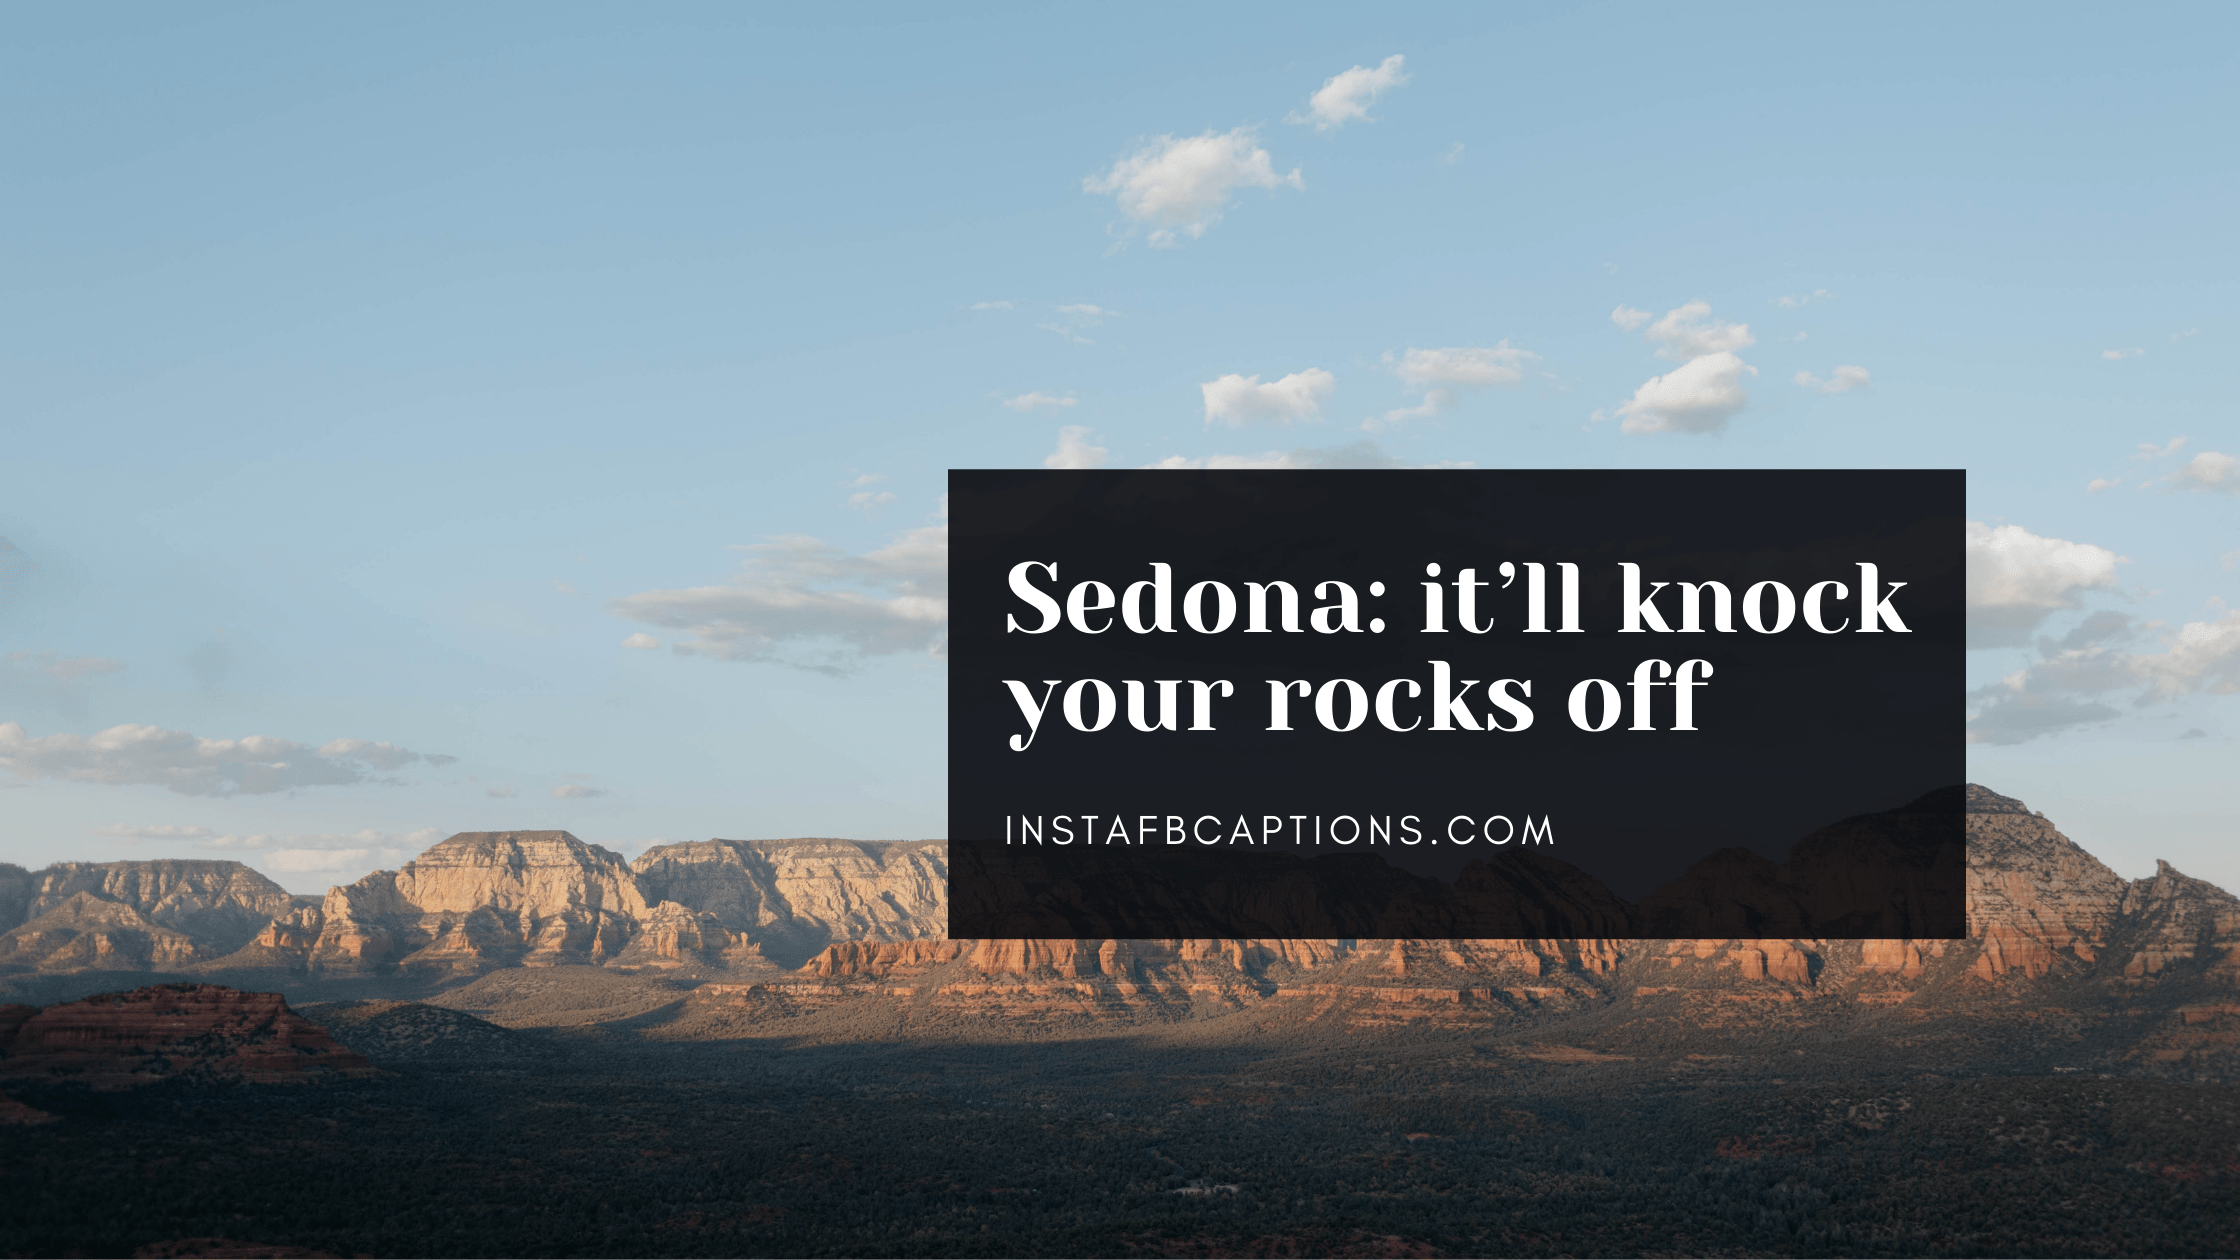 Amazing Sedona Puns  - Amazing Sedona Puns - 128 Sedona Instagram Captions for Vacation in 2023